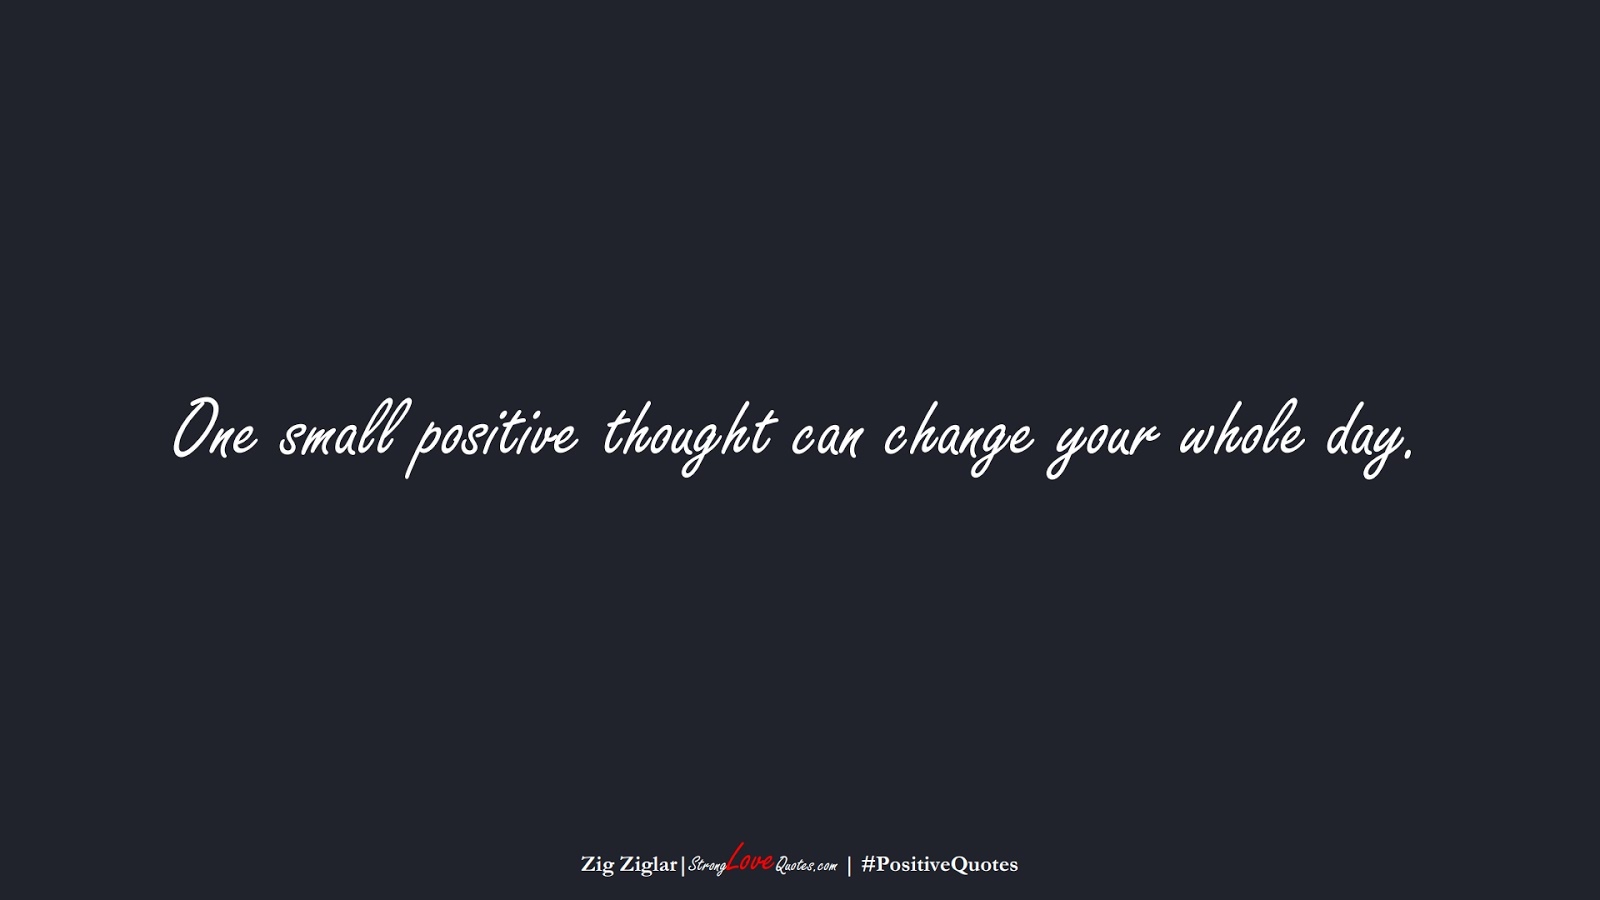 One small positive thought can change your whole day. (Zig Ziglar);  #PositiveQuotes